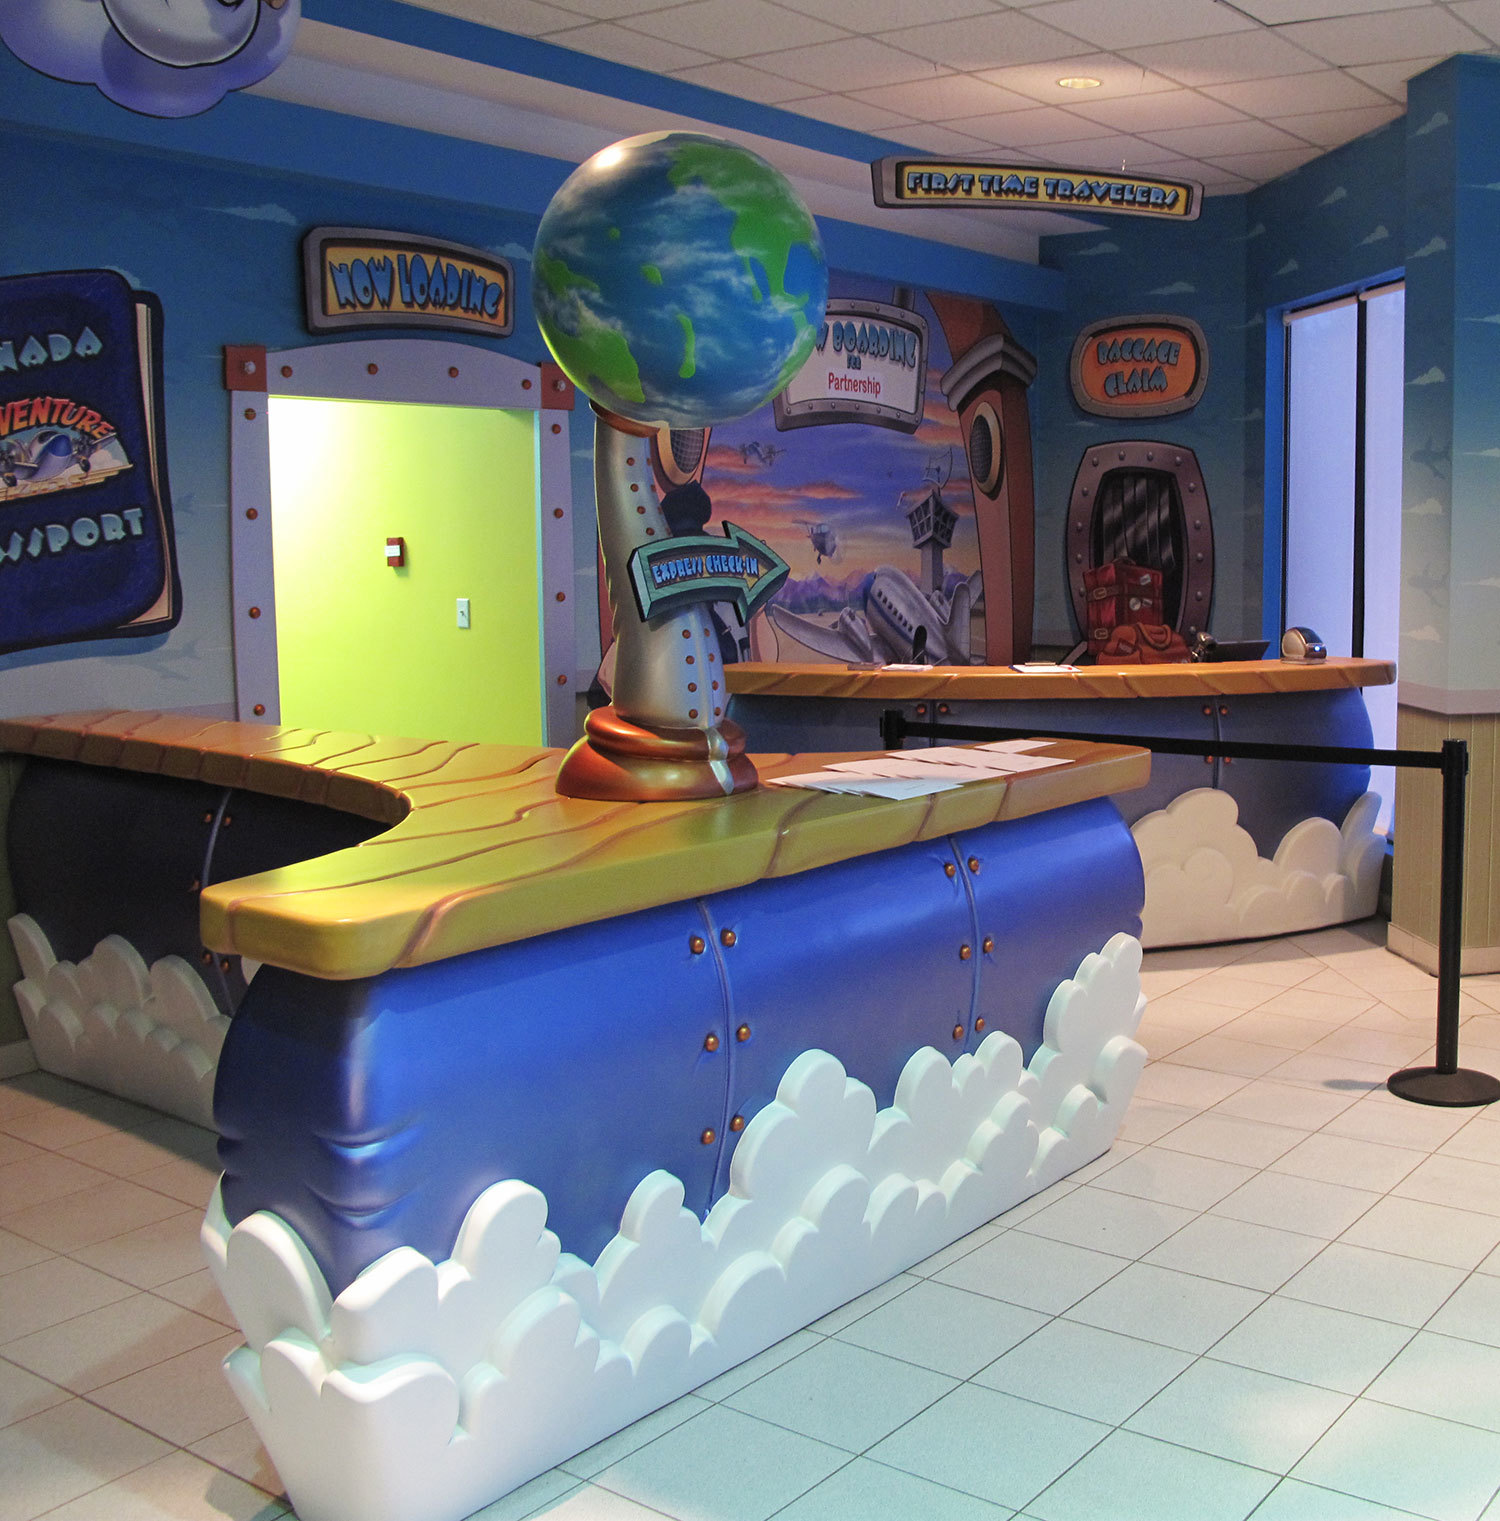 Airport Themed room with 3D sculpted Check-In Desk of sky and clouds with a carved faux wood countertop and airport scene murals behind.